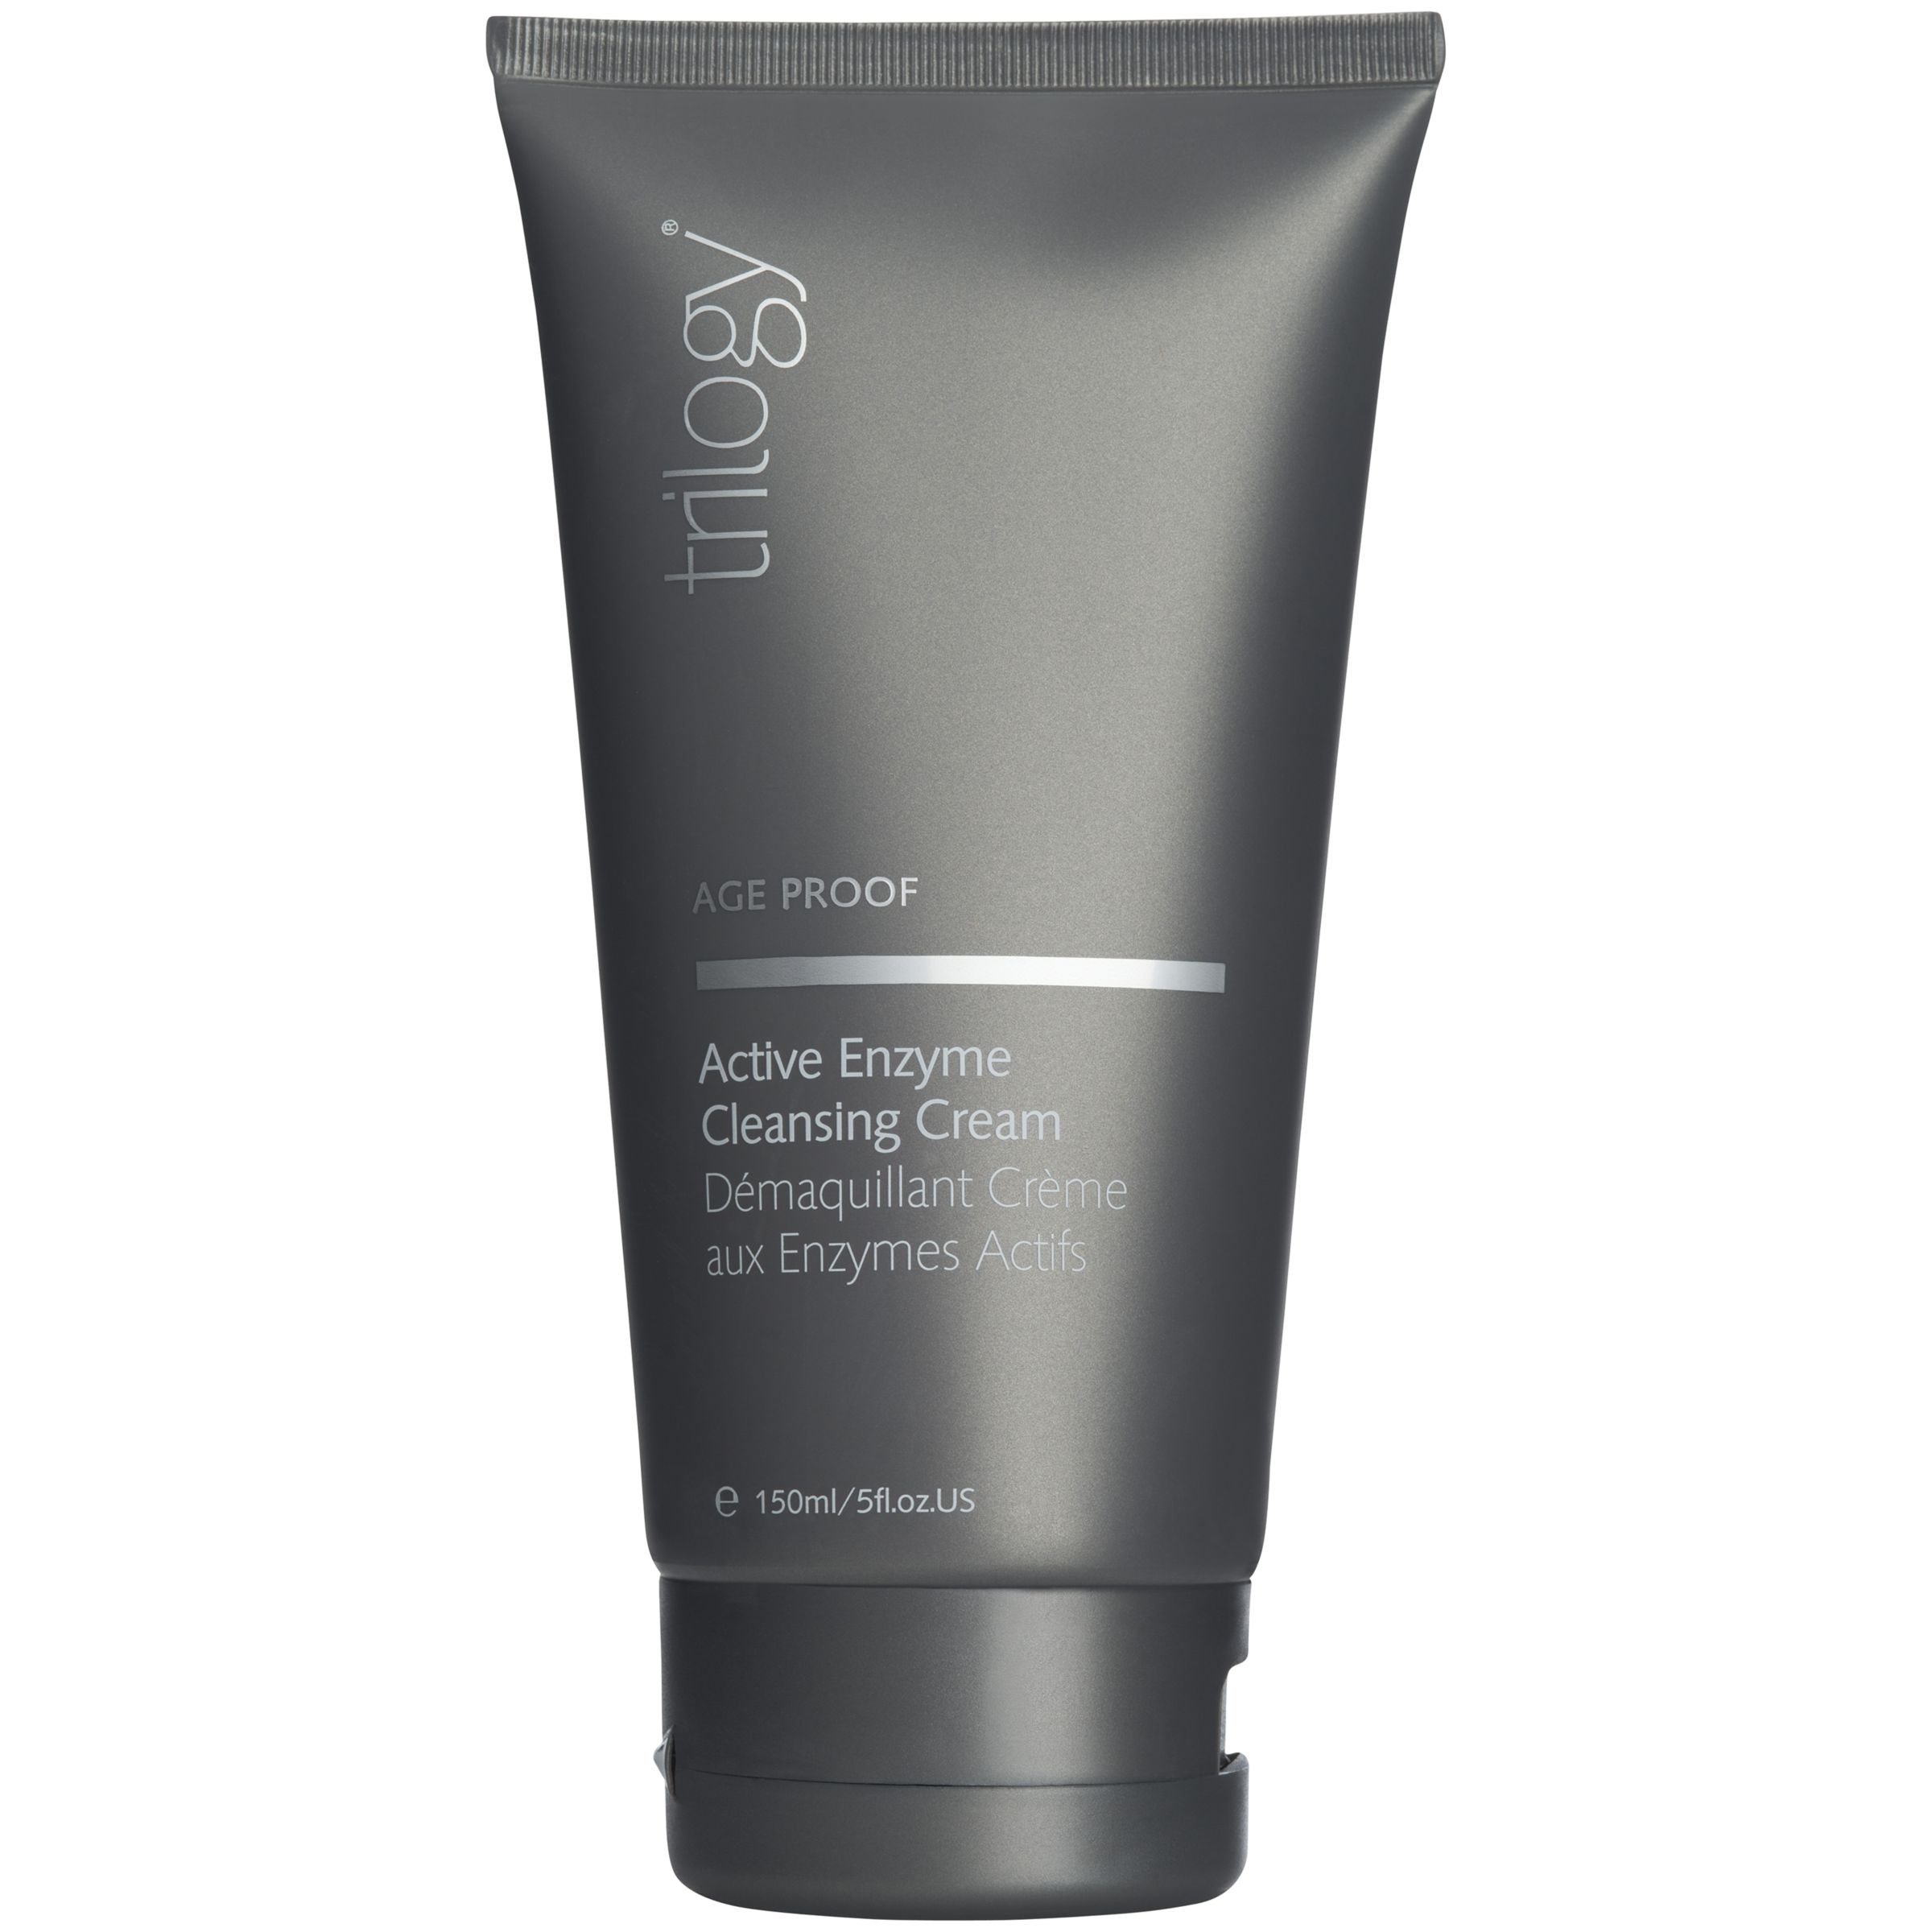 Age Proof Enzyme Cleansing Cream, 150ml